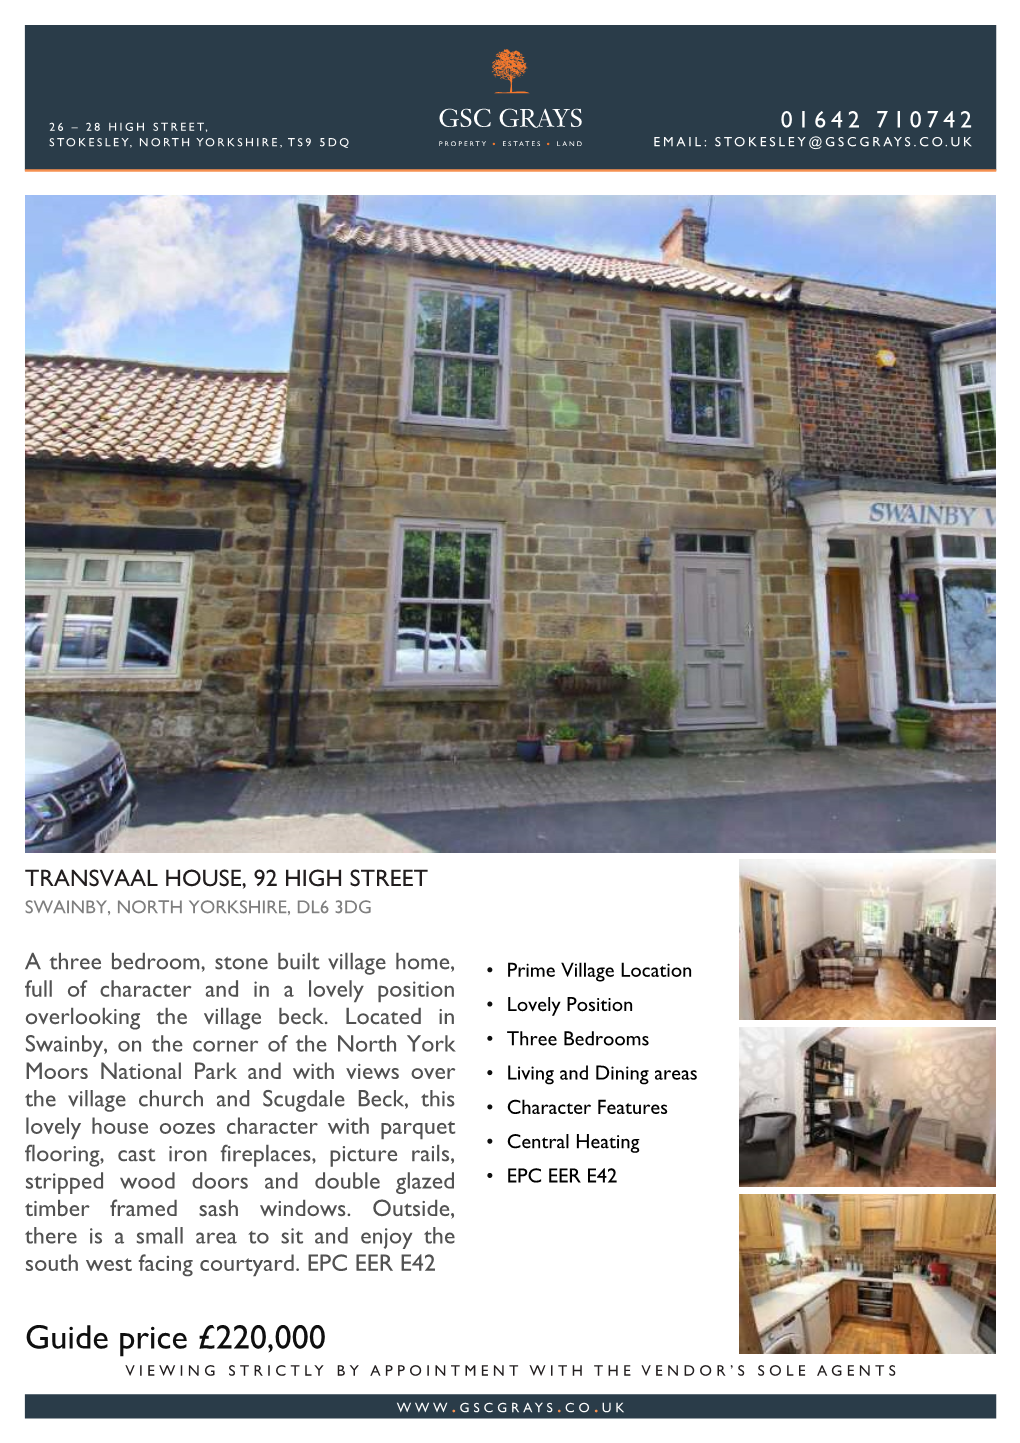 Guide Price £220,000 VIEWING STRICTLY by APPOINTMENT with the VENDOR’S SOLE AGENTS